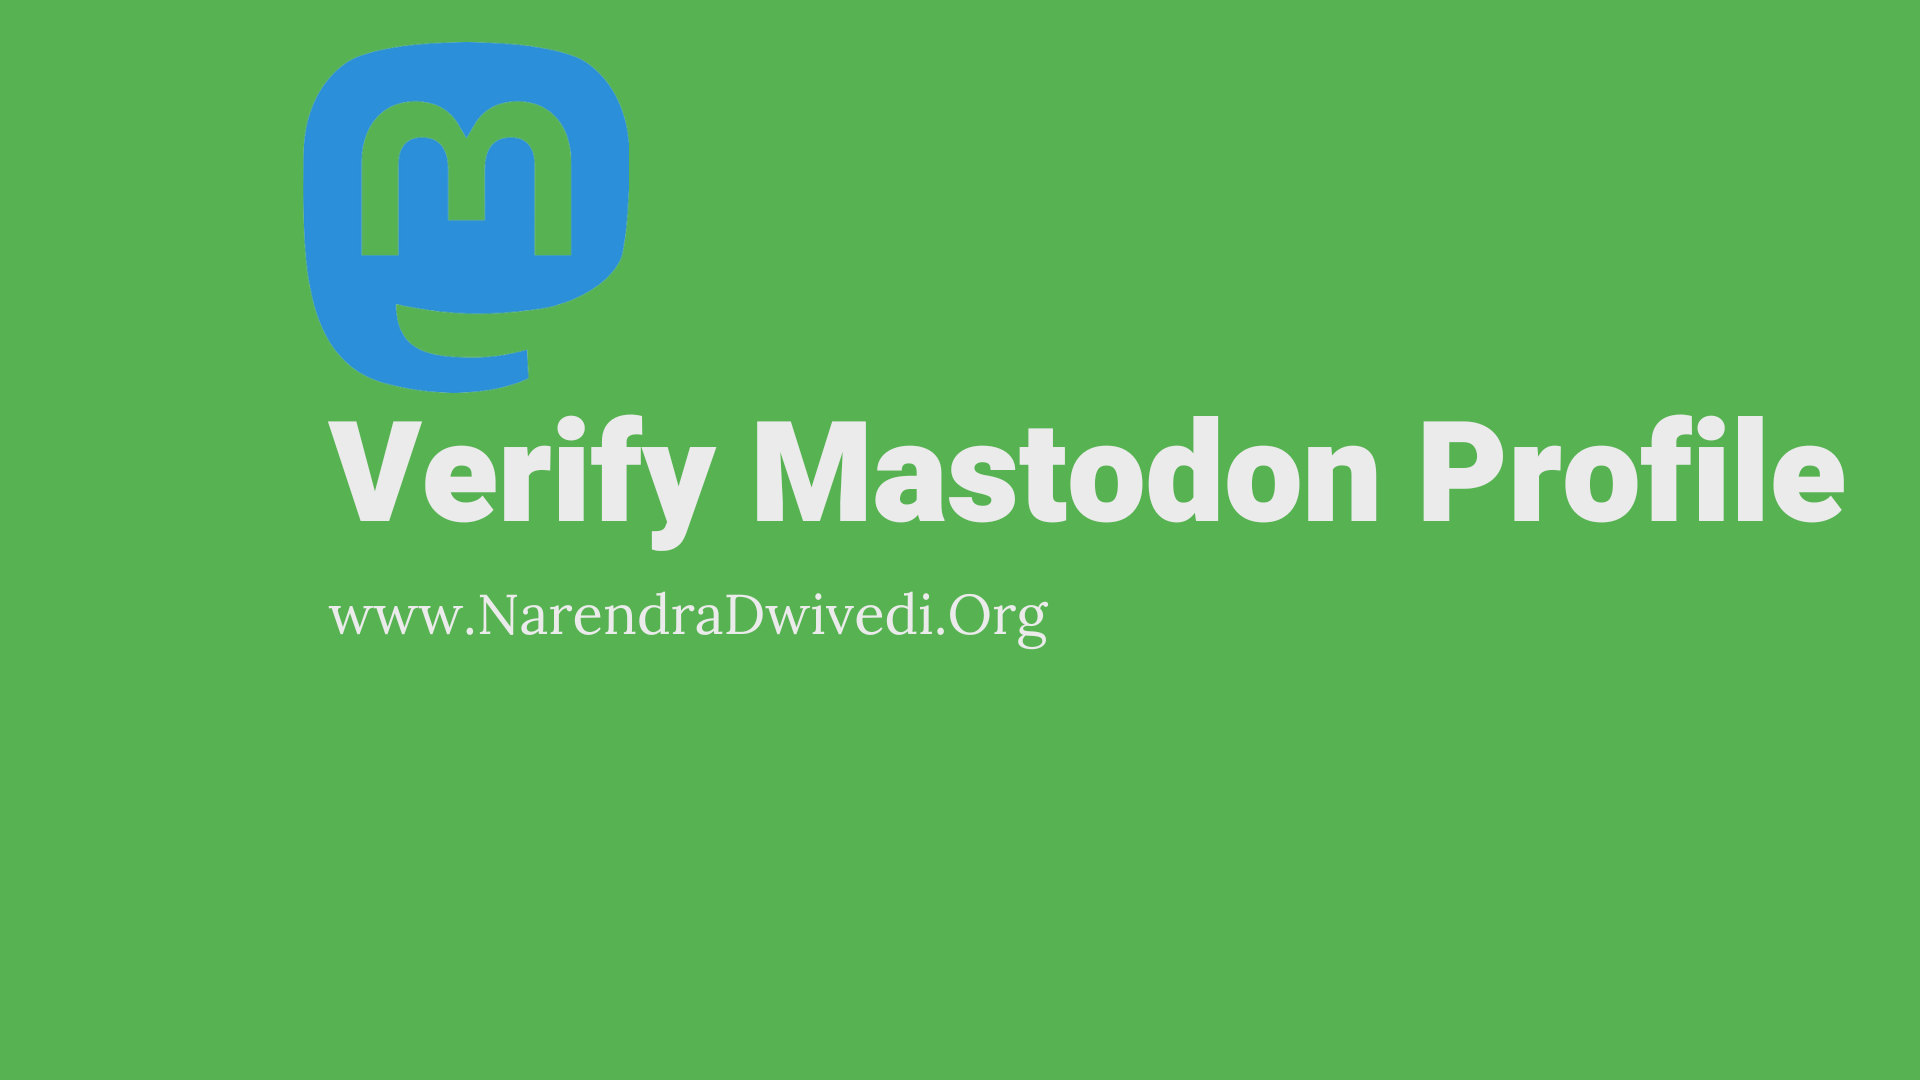 How To Get Started On Mastodon